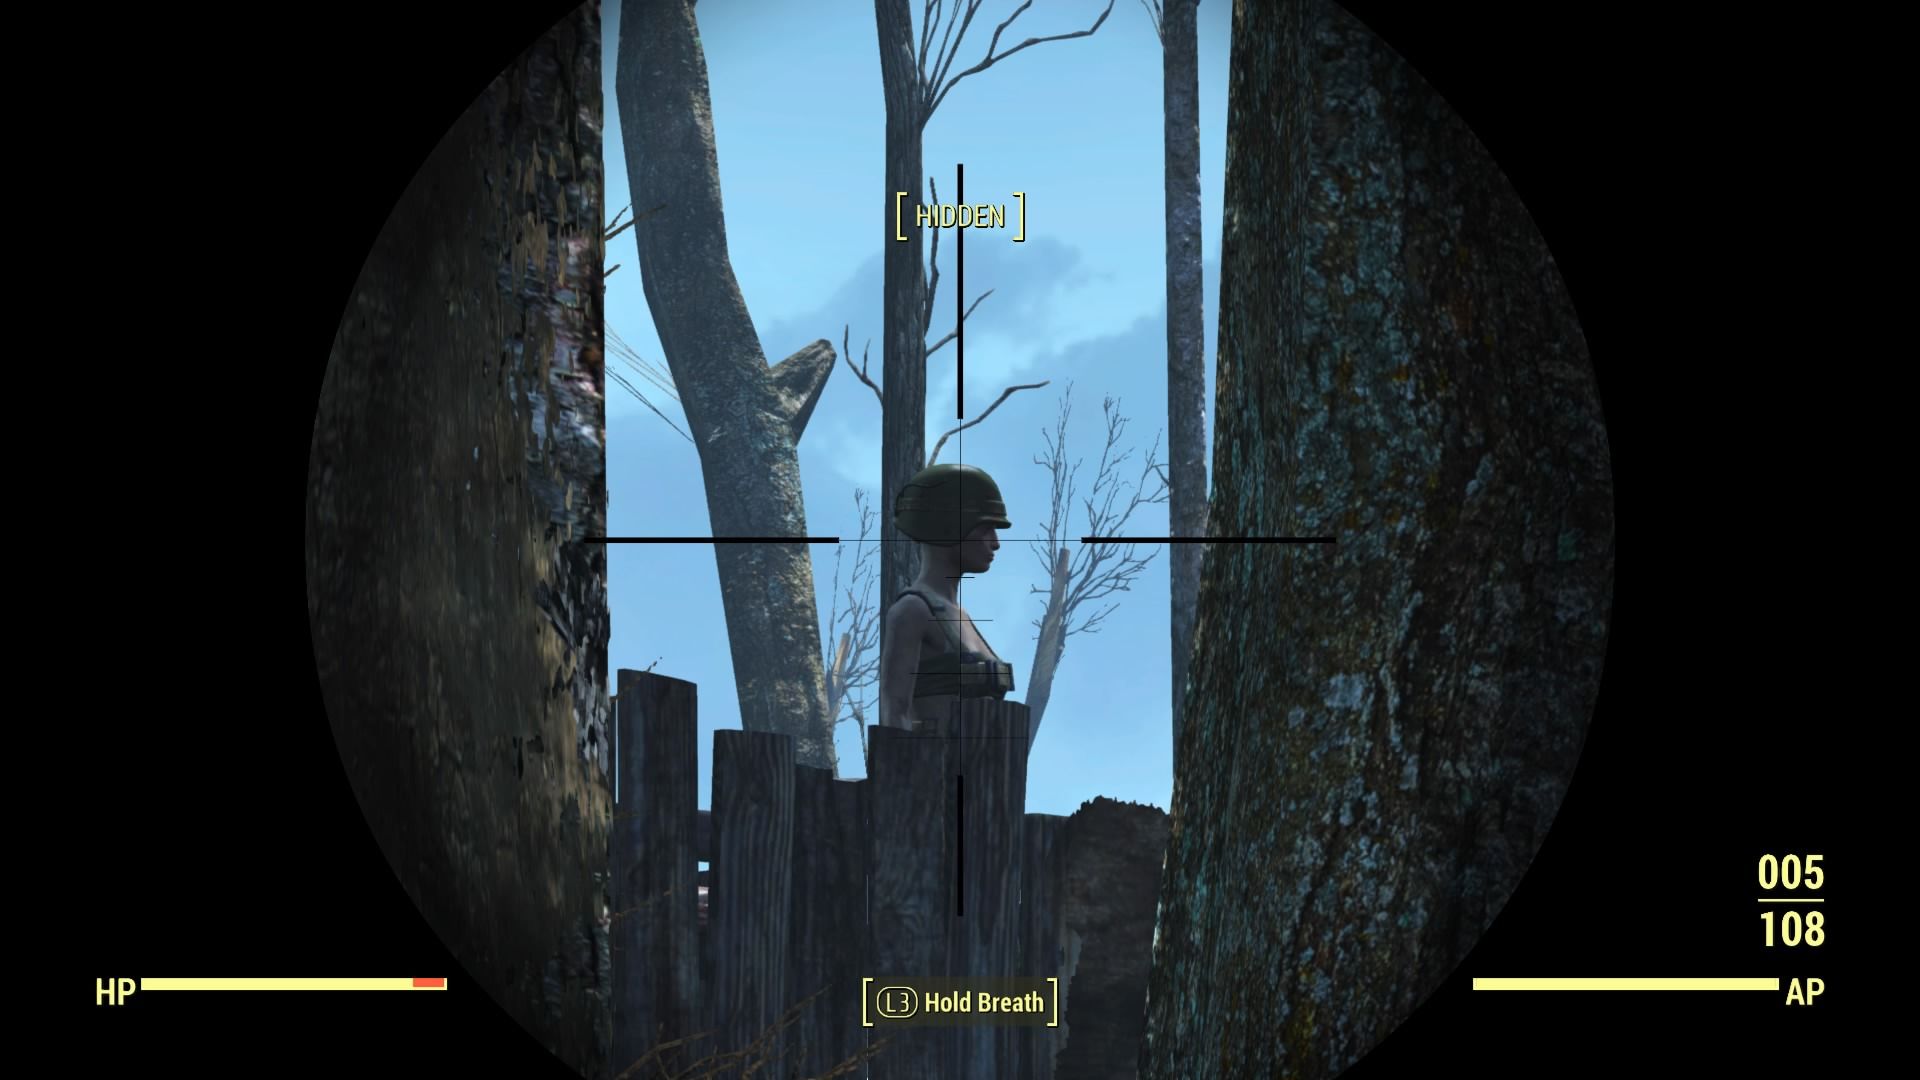 Looking through a scope in Fallout 4